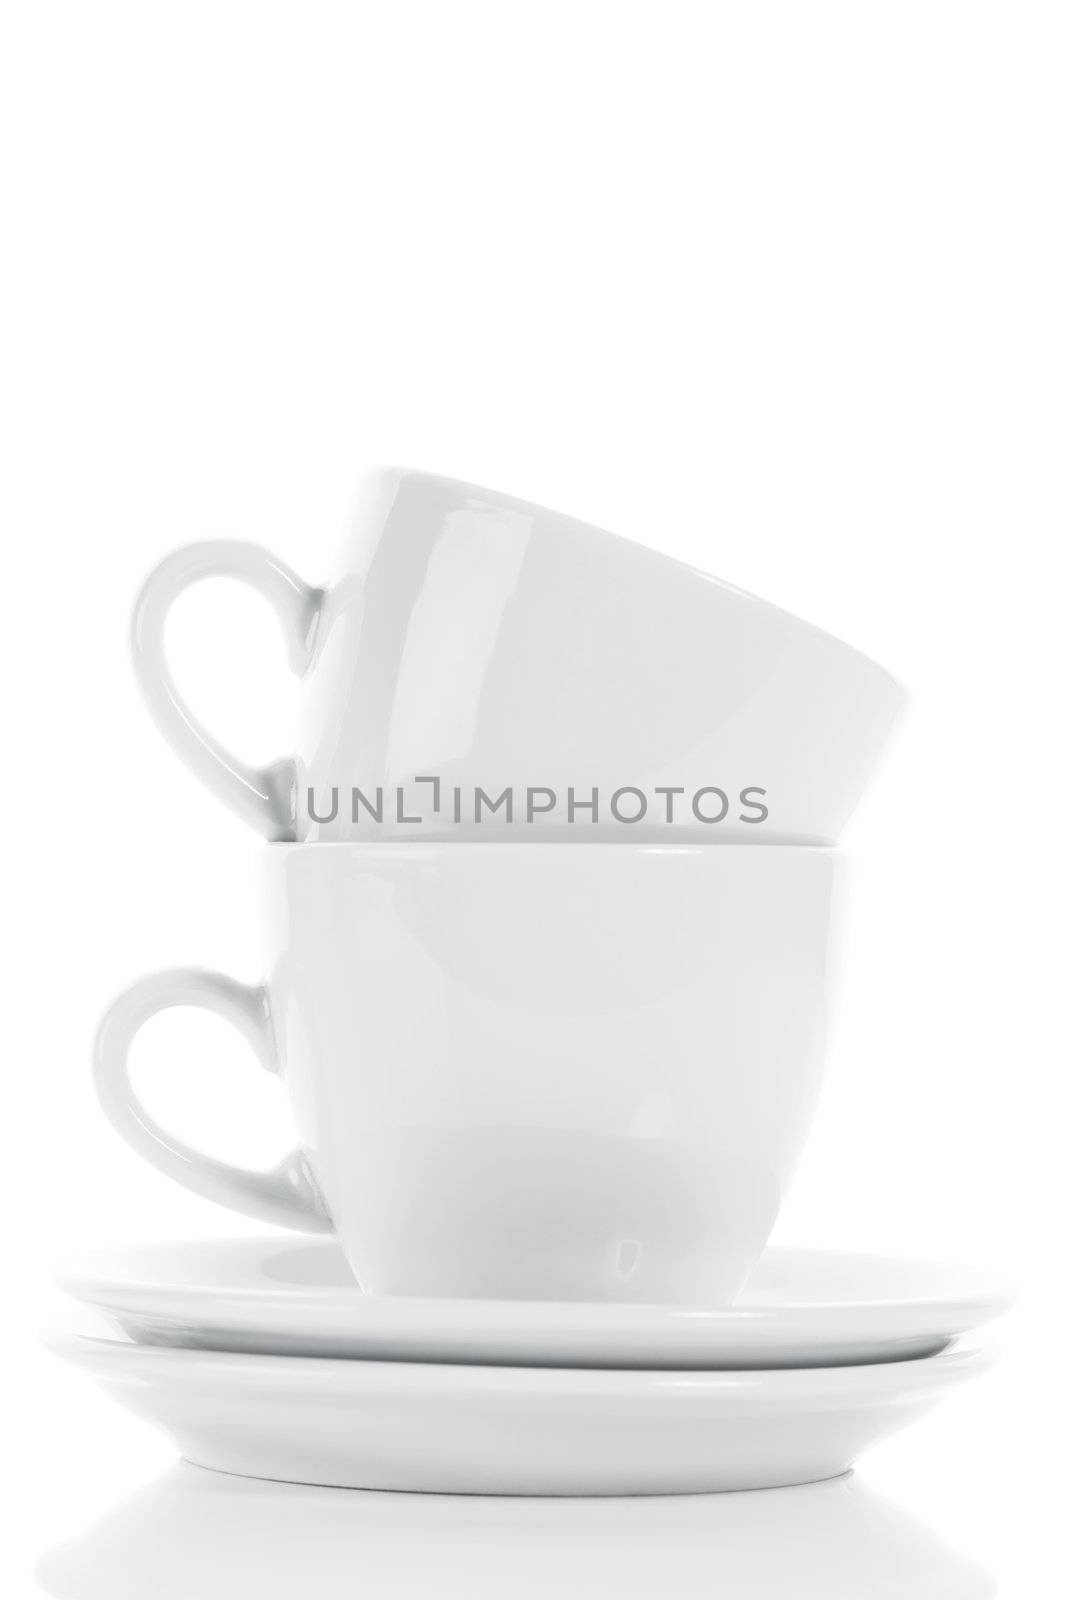 two white stapled coffee cups on white background